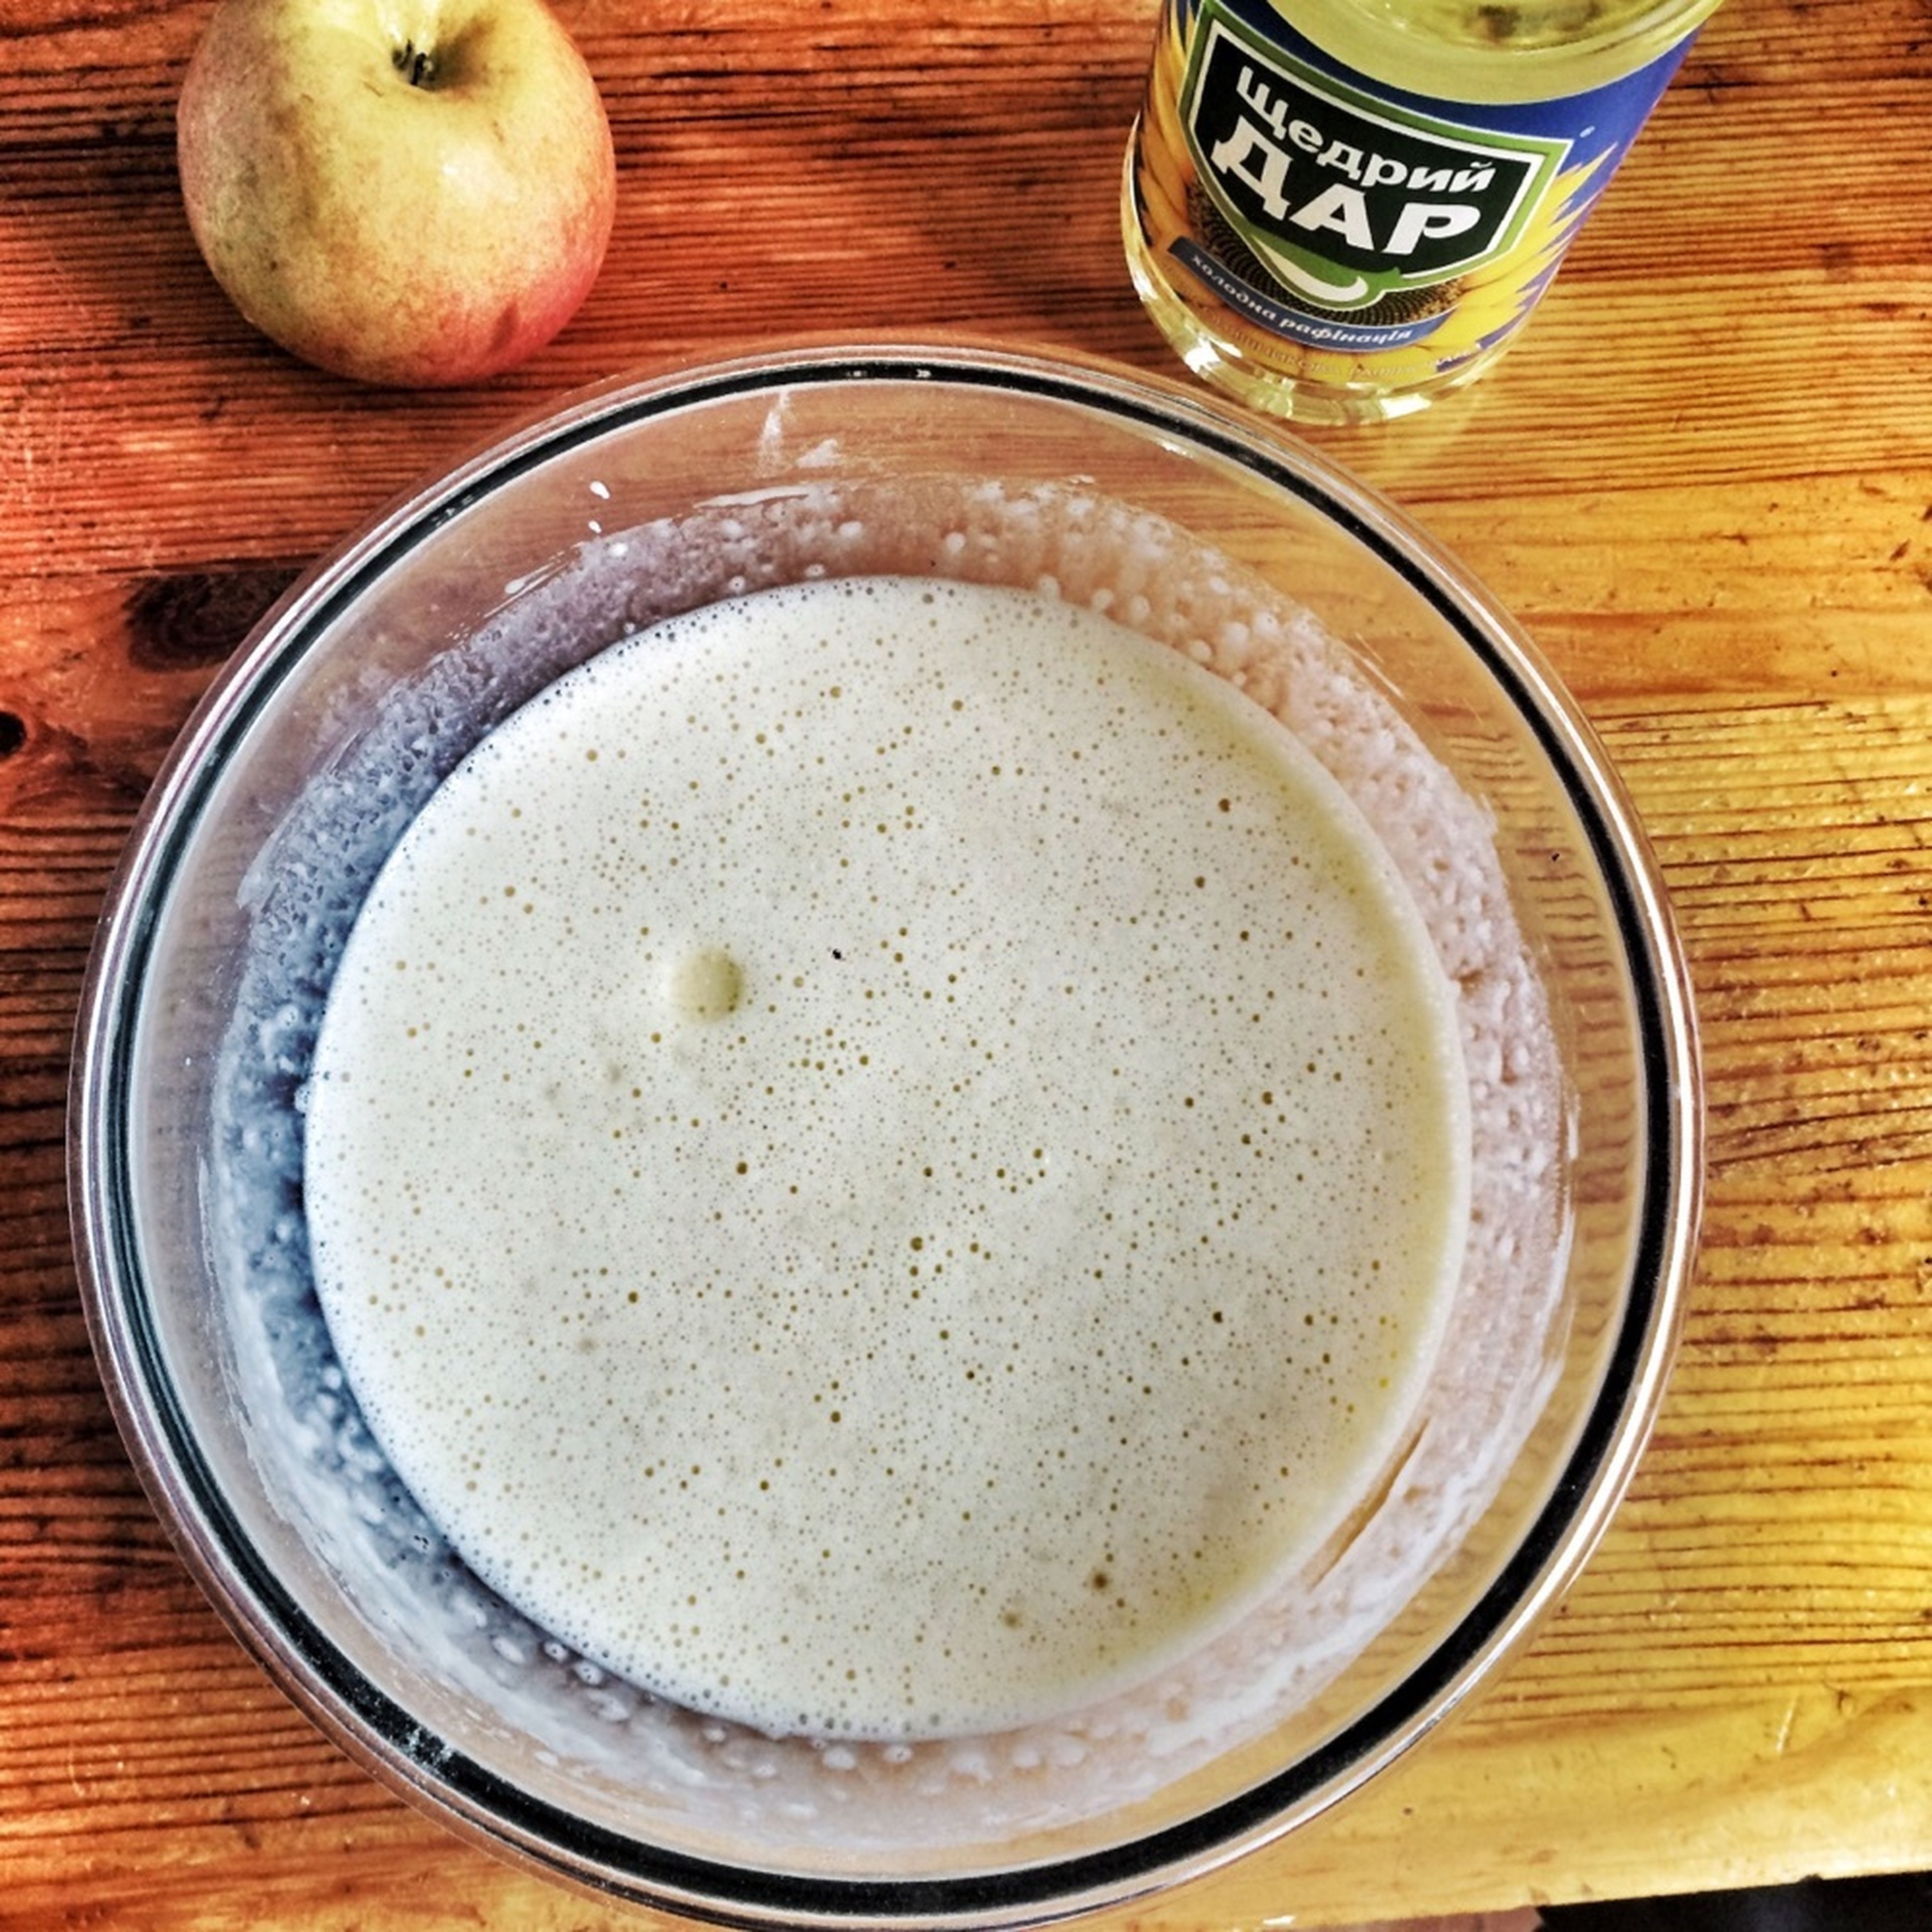 Add oil and mix. Prepare ingredients for pancakes filling: Grate apple and add cinnamon.